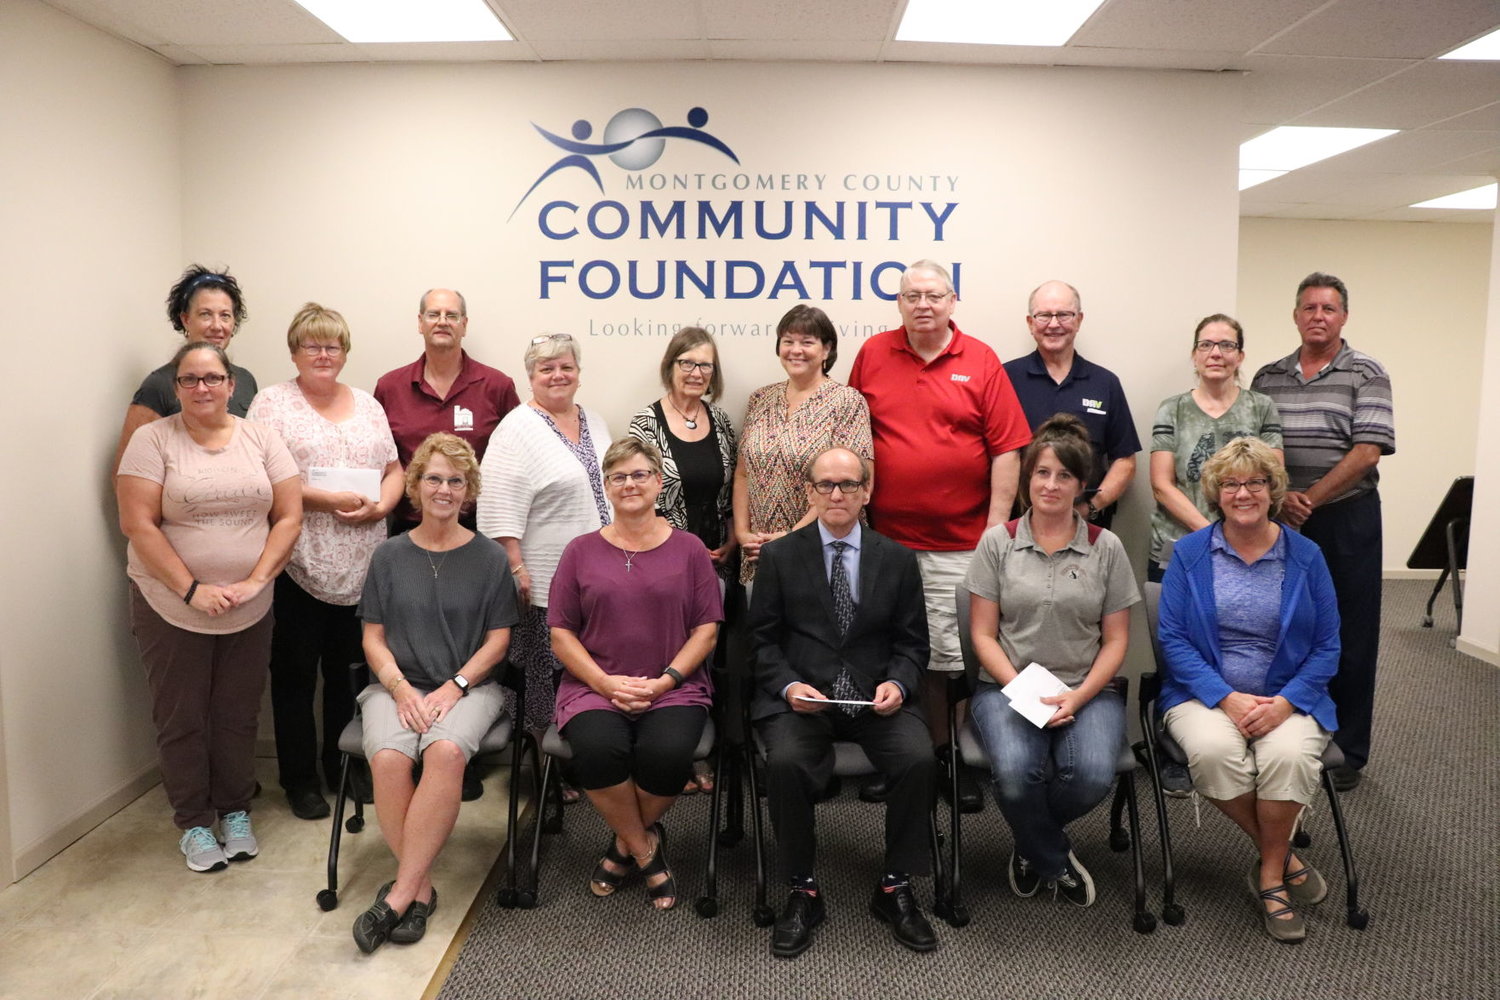 Montgomery County Community Foundation awarded $171,307 in grants to 11 nonprofit agencies this week. Recipients included: Animal Welfare League, Crawfordsville Adult Resource Academy, Crawfordsville Main Street, League of Women Voters, Lew Wallace Study Preservation Society, Montgomery County IN Disabled American Veterans Chapter 103, New Richmond Town Park, North Montgomery School Corporation, Rainbows &amp; Rhymes Preschool, South Montgomery’s Little Mounties Preschool and Youth Service Bureau.